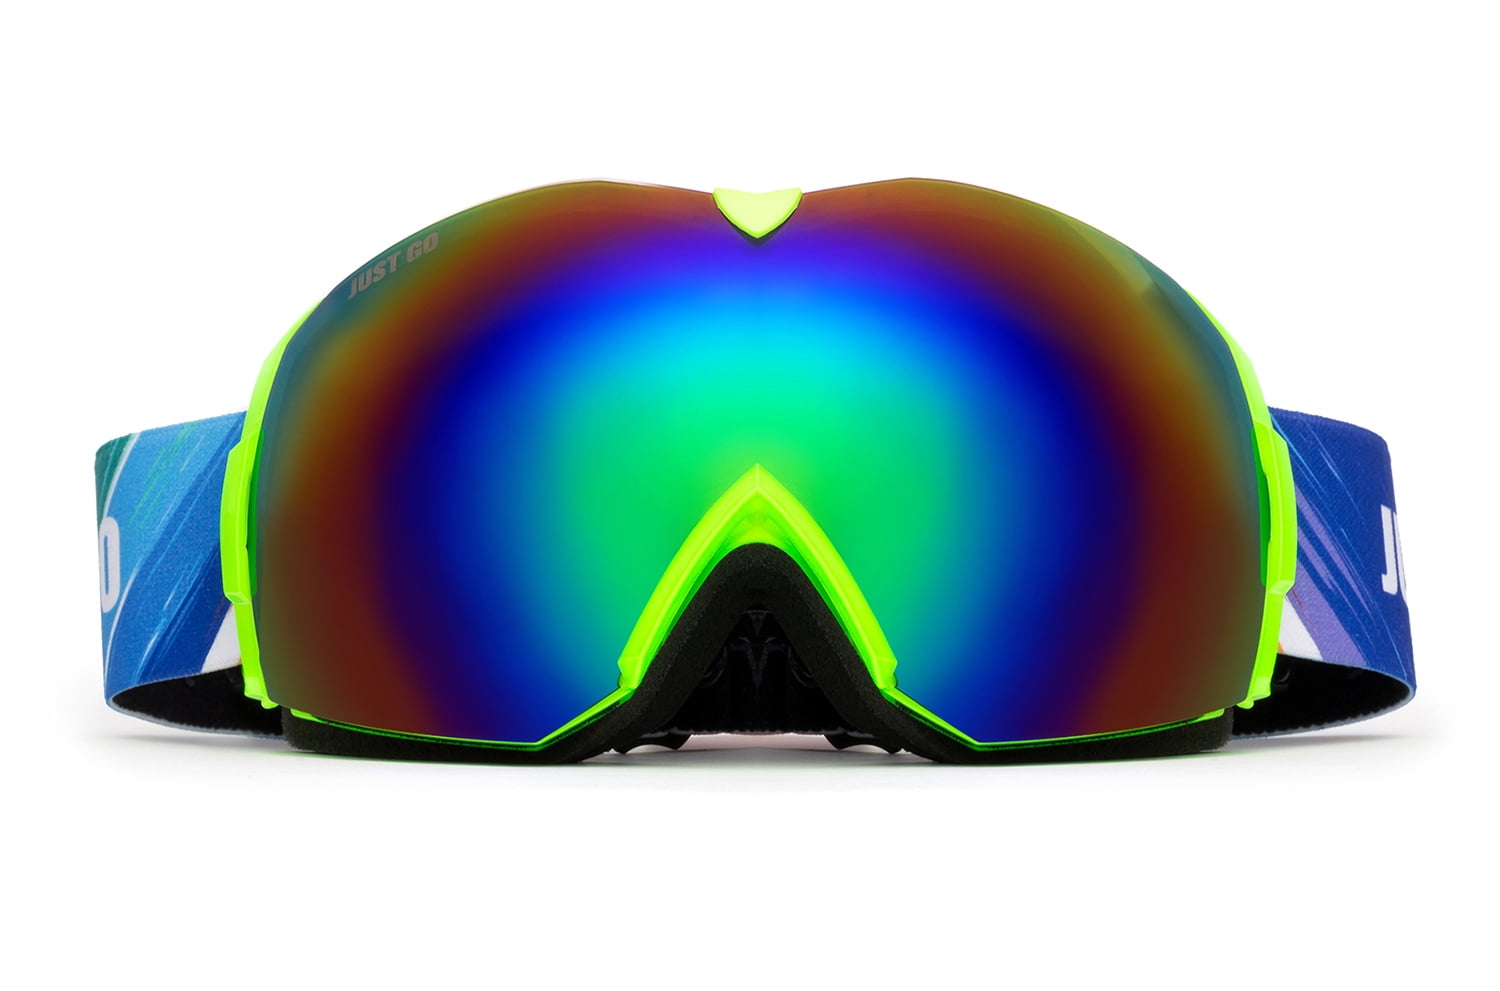 Ski Goggles Windproof Snowboard Goggles with Anti Fog Dual Lens & UV400 Protection Snow Skiing Goggles for Men Women 